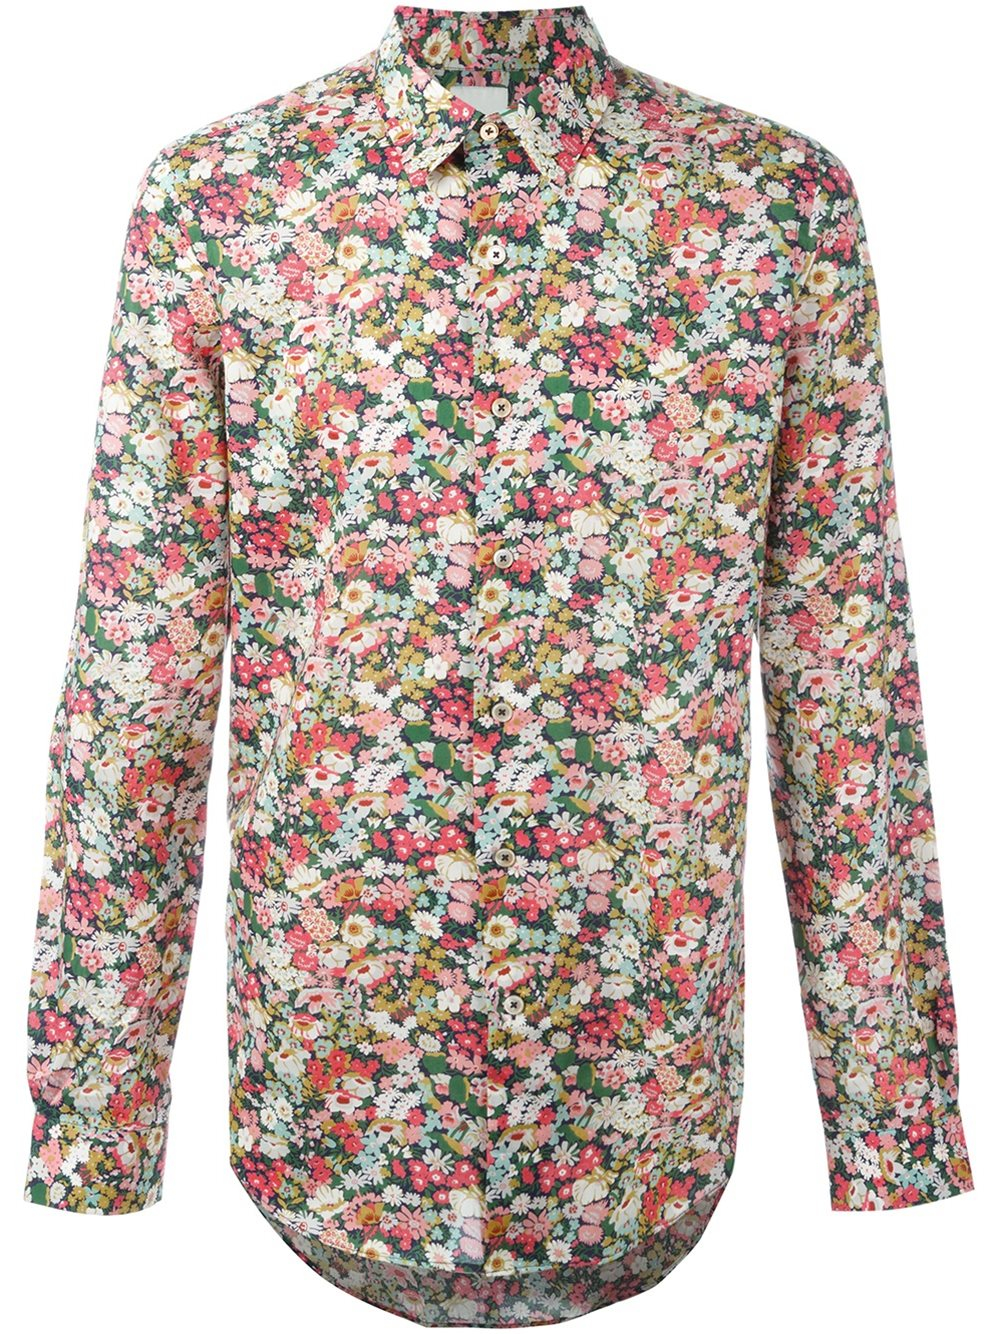 Paul smith Floral Print Shirt in Multicolor for Men | Lyst